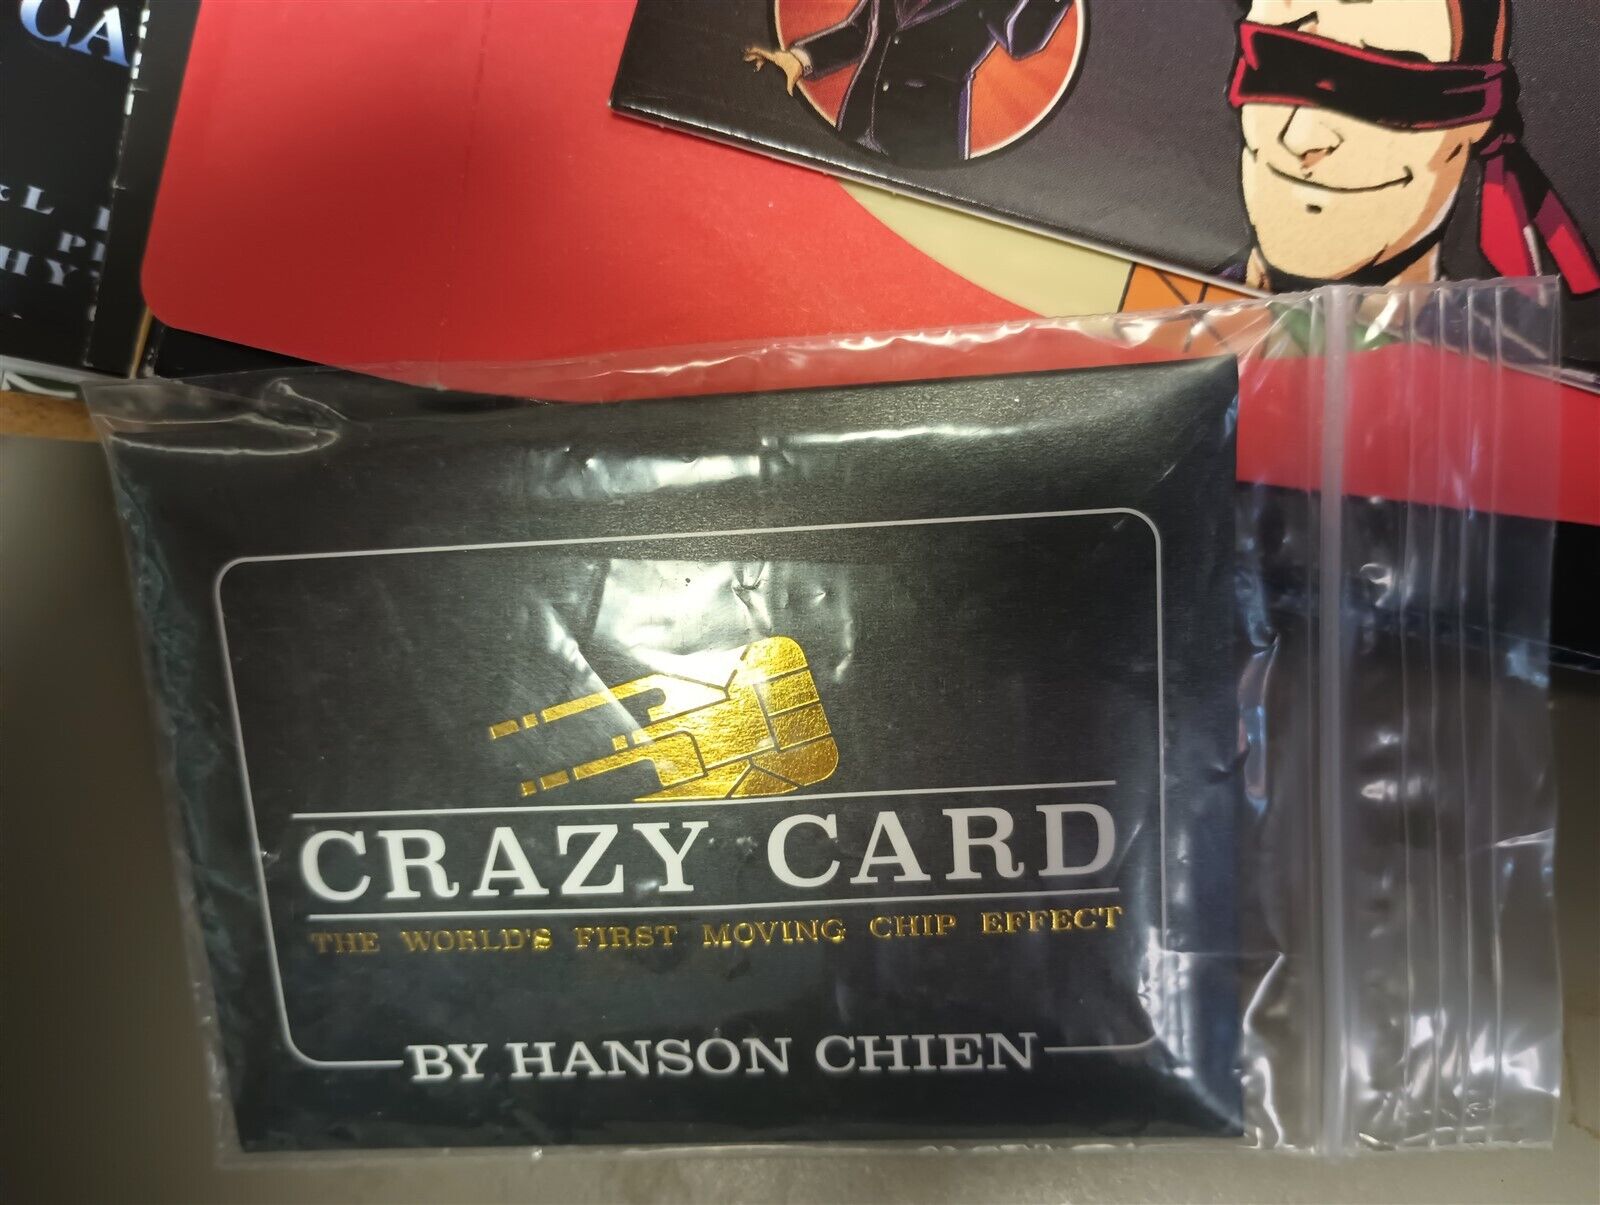 Crazy Card by Hanson Chien A STUNNING visual Move the Chip on a Credit Card